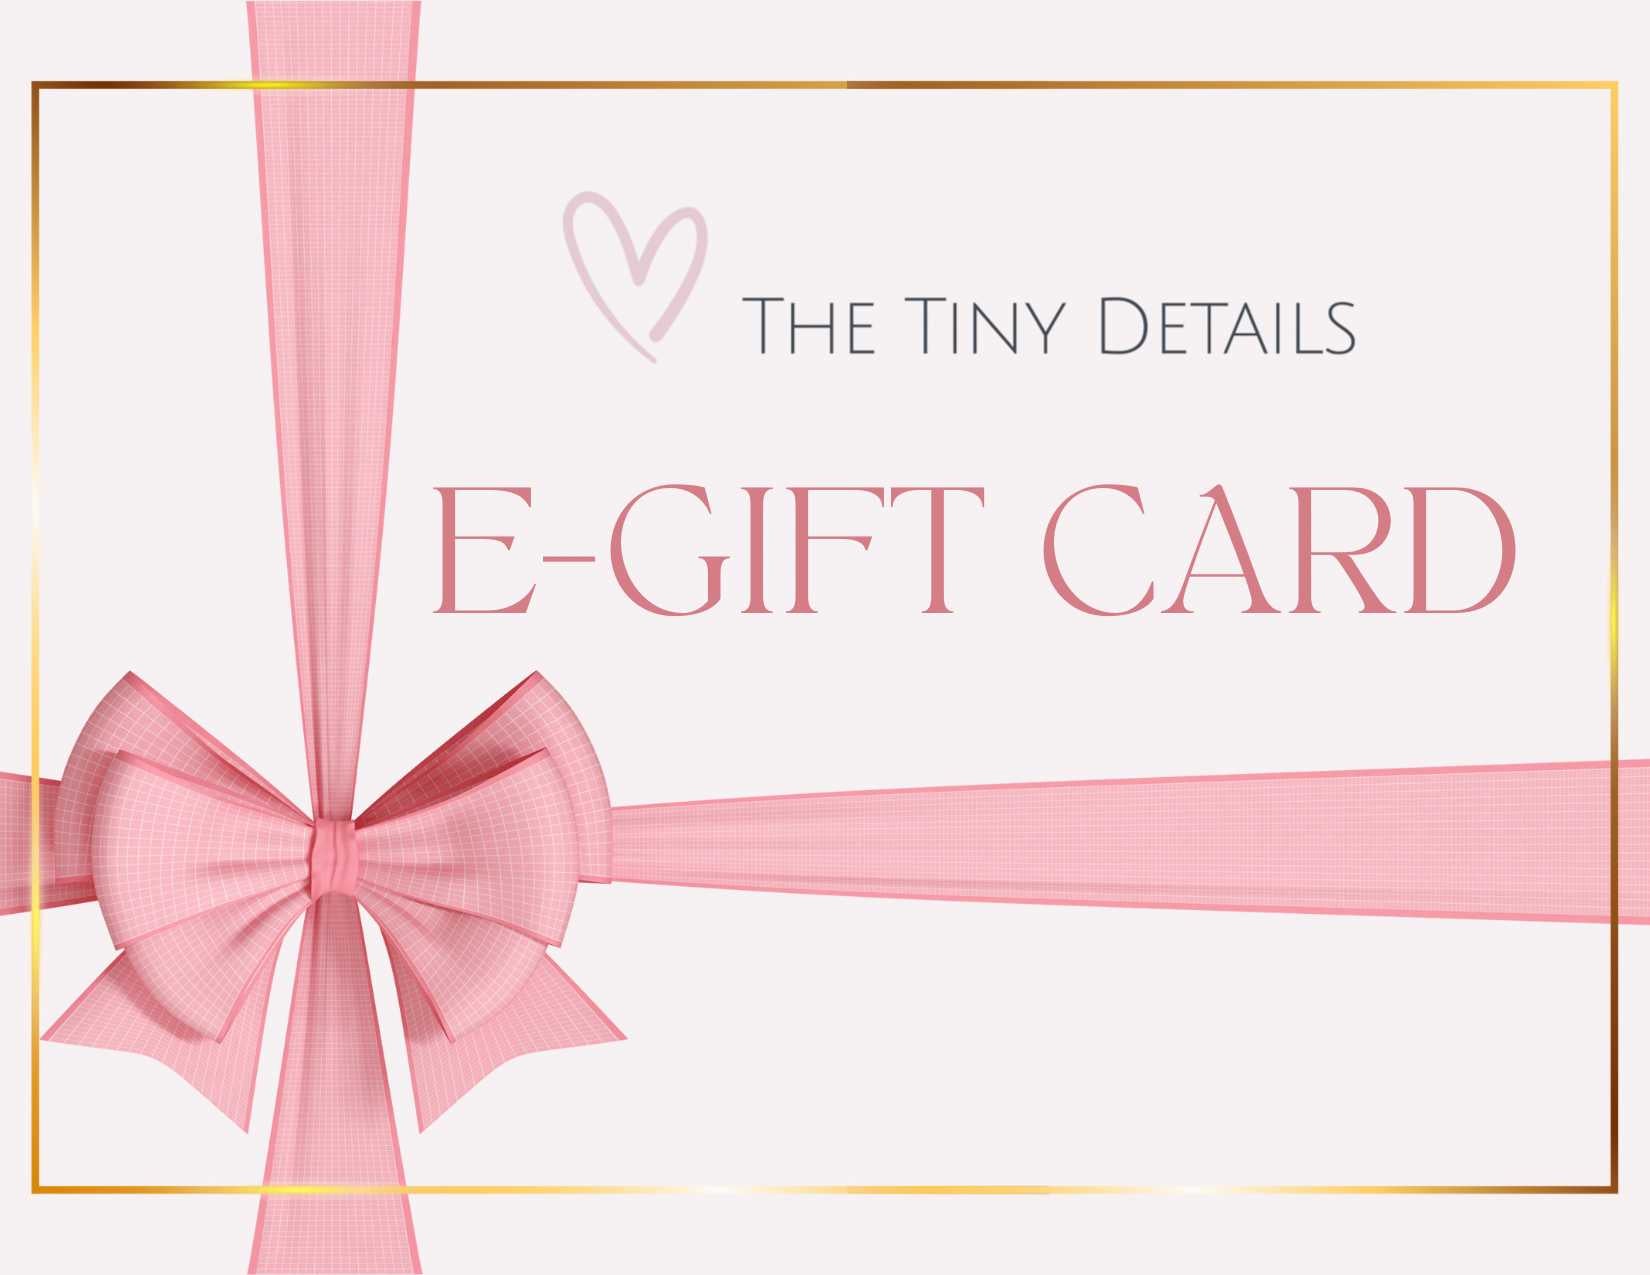 The Tiny Details E-Gift Card